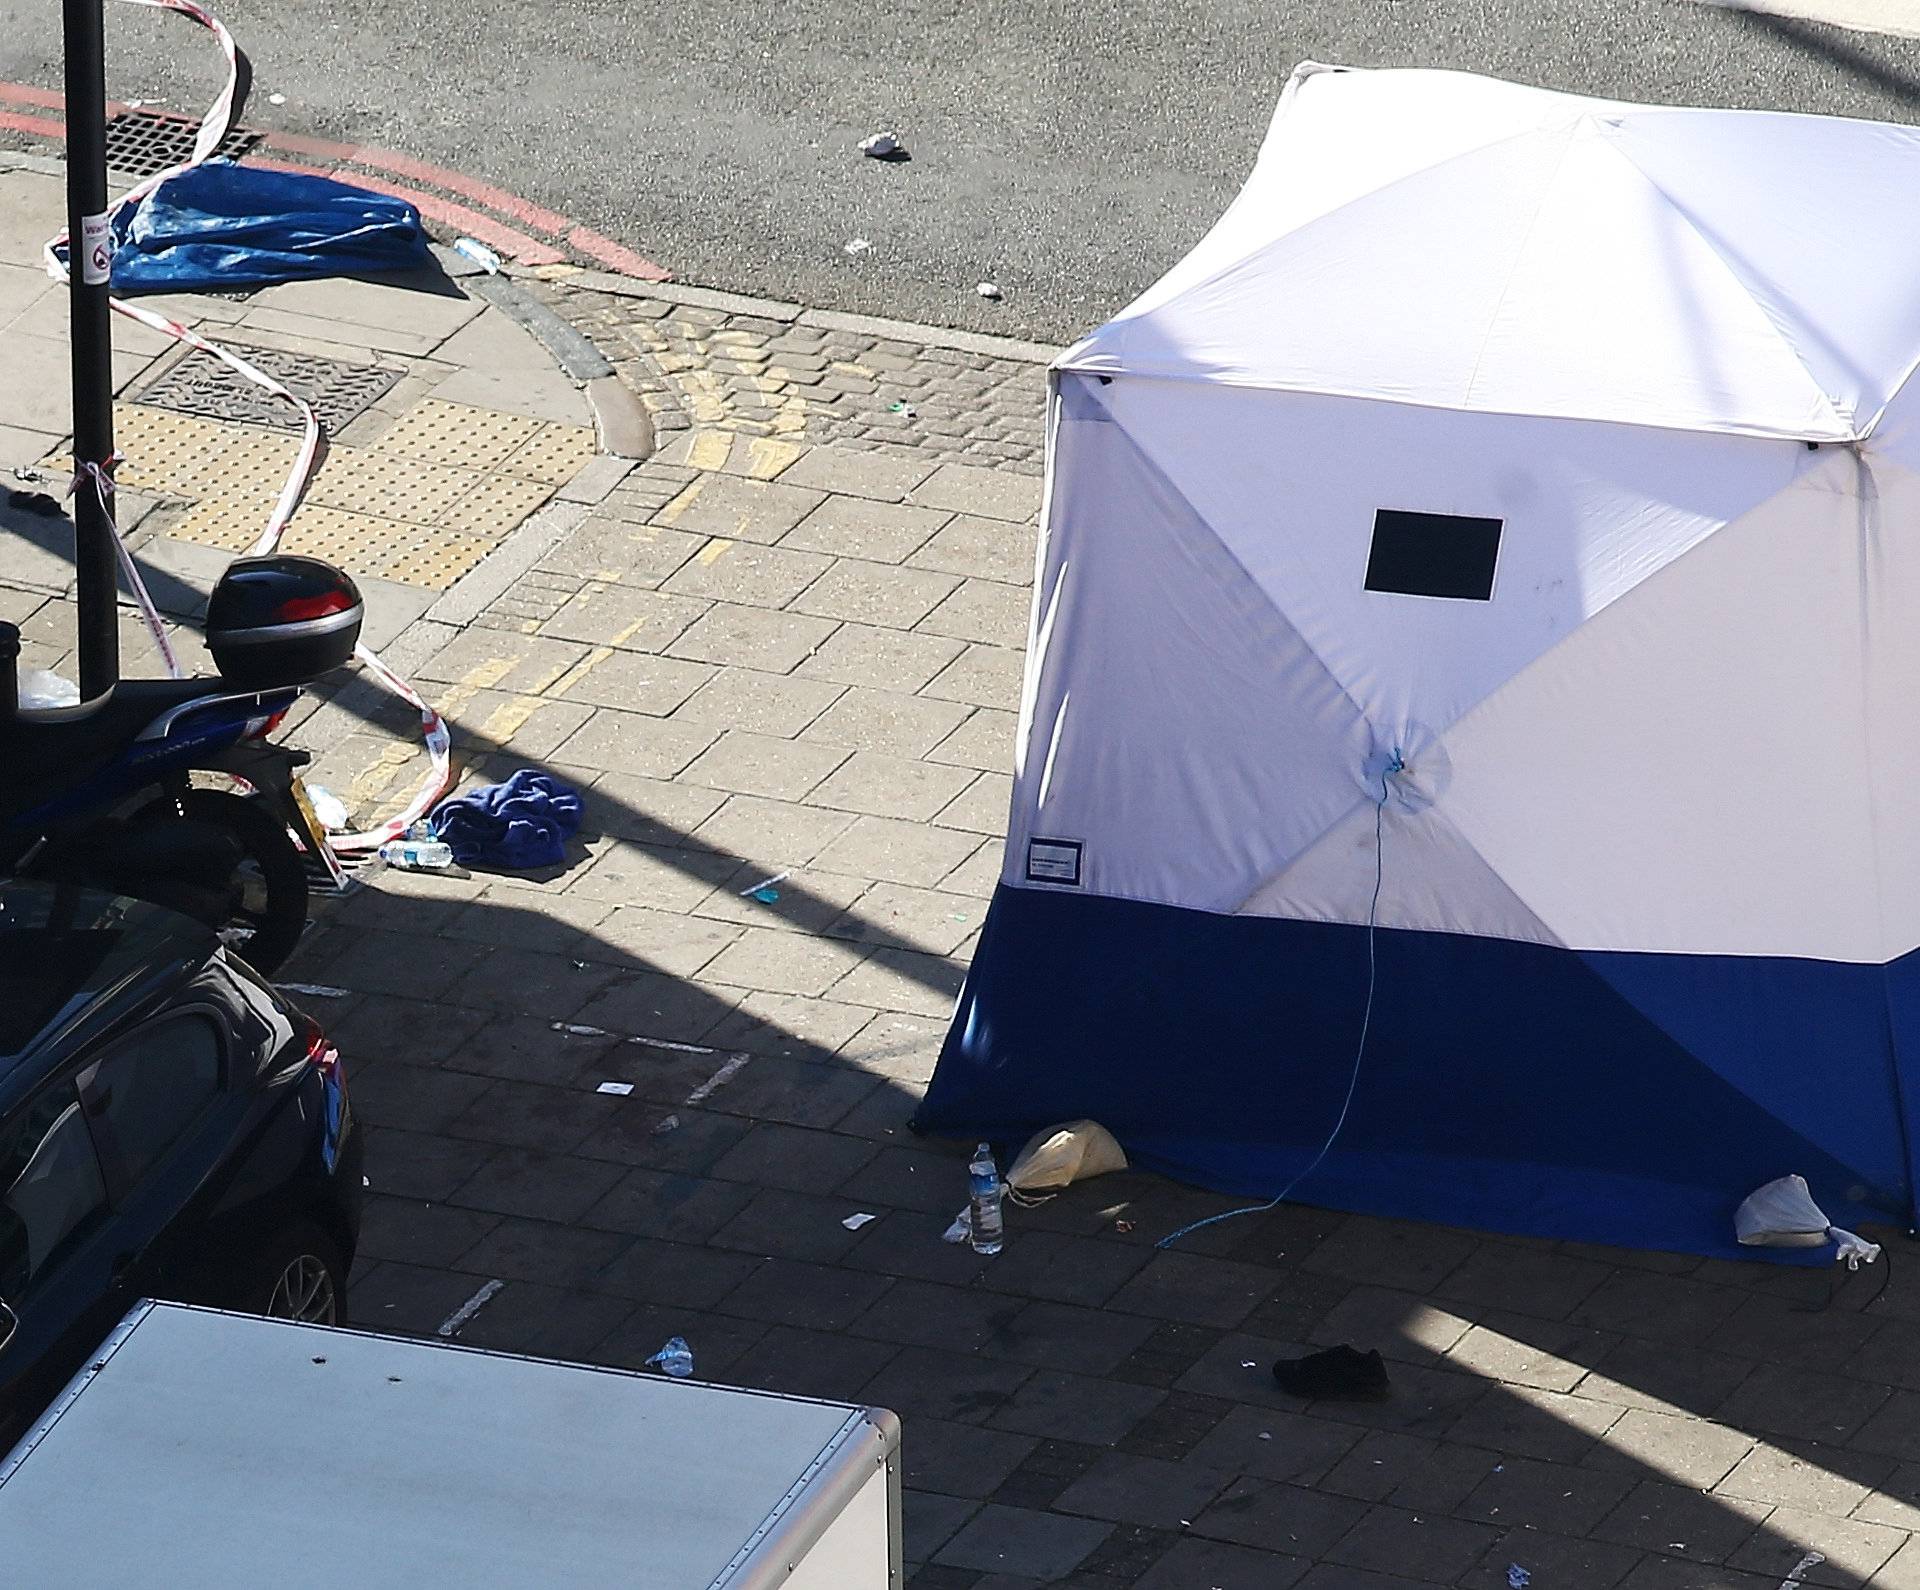 Debris and a forensic officers tent is seen at the scene after a vehicle collided with pedestrians in the Finsbury Park neighbourhood of North London